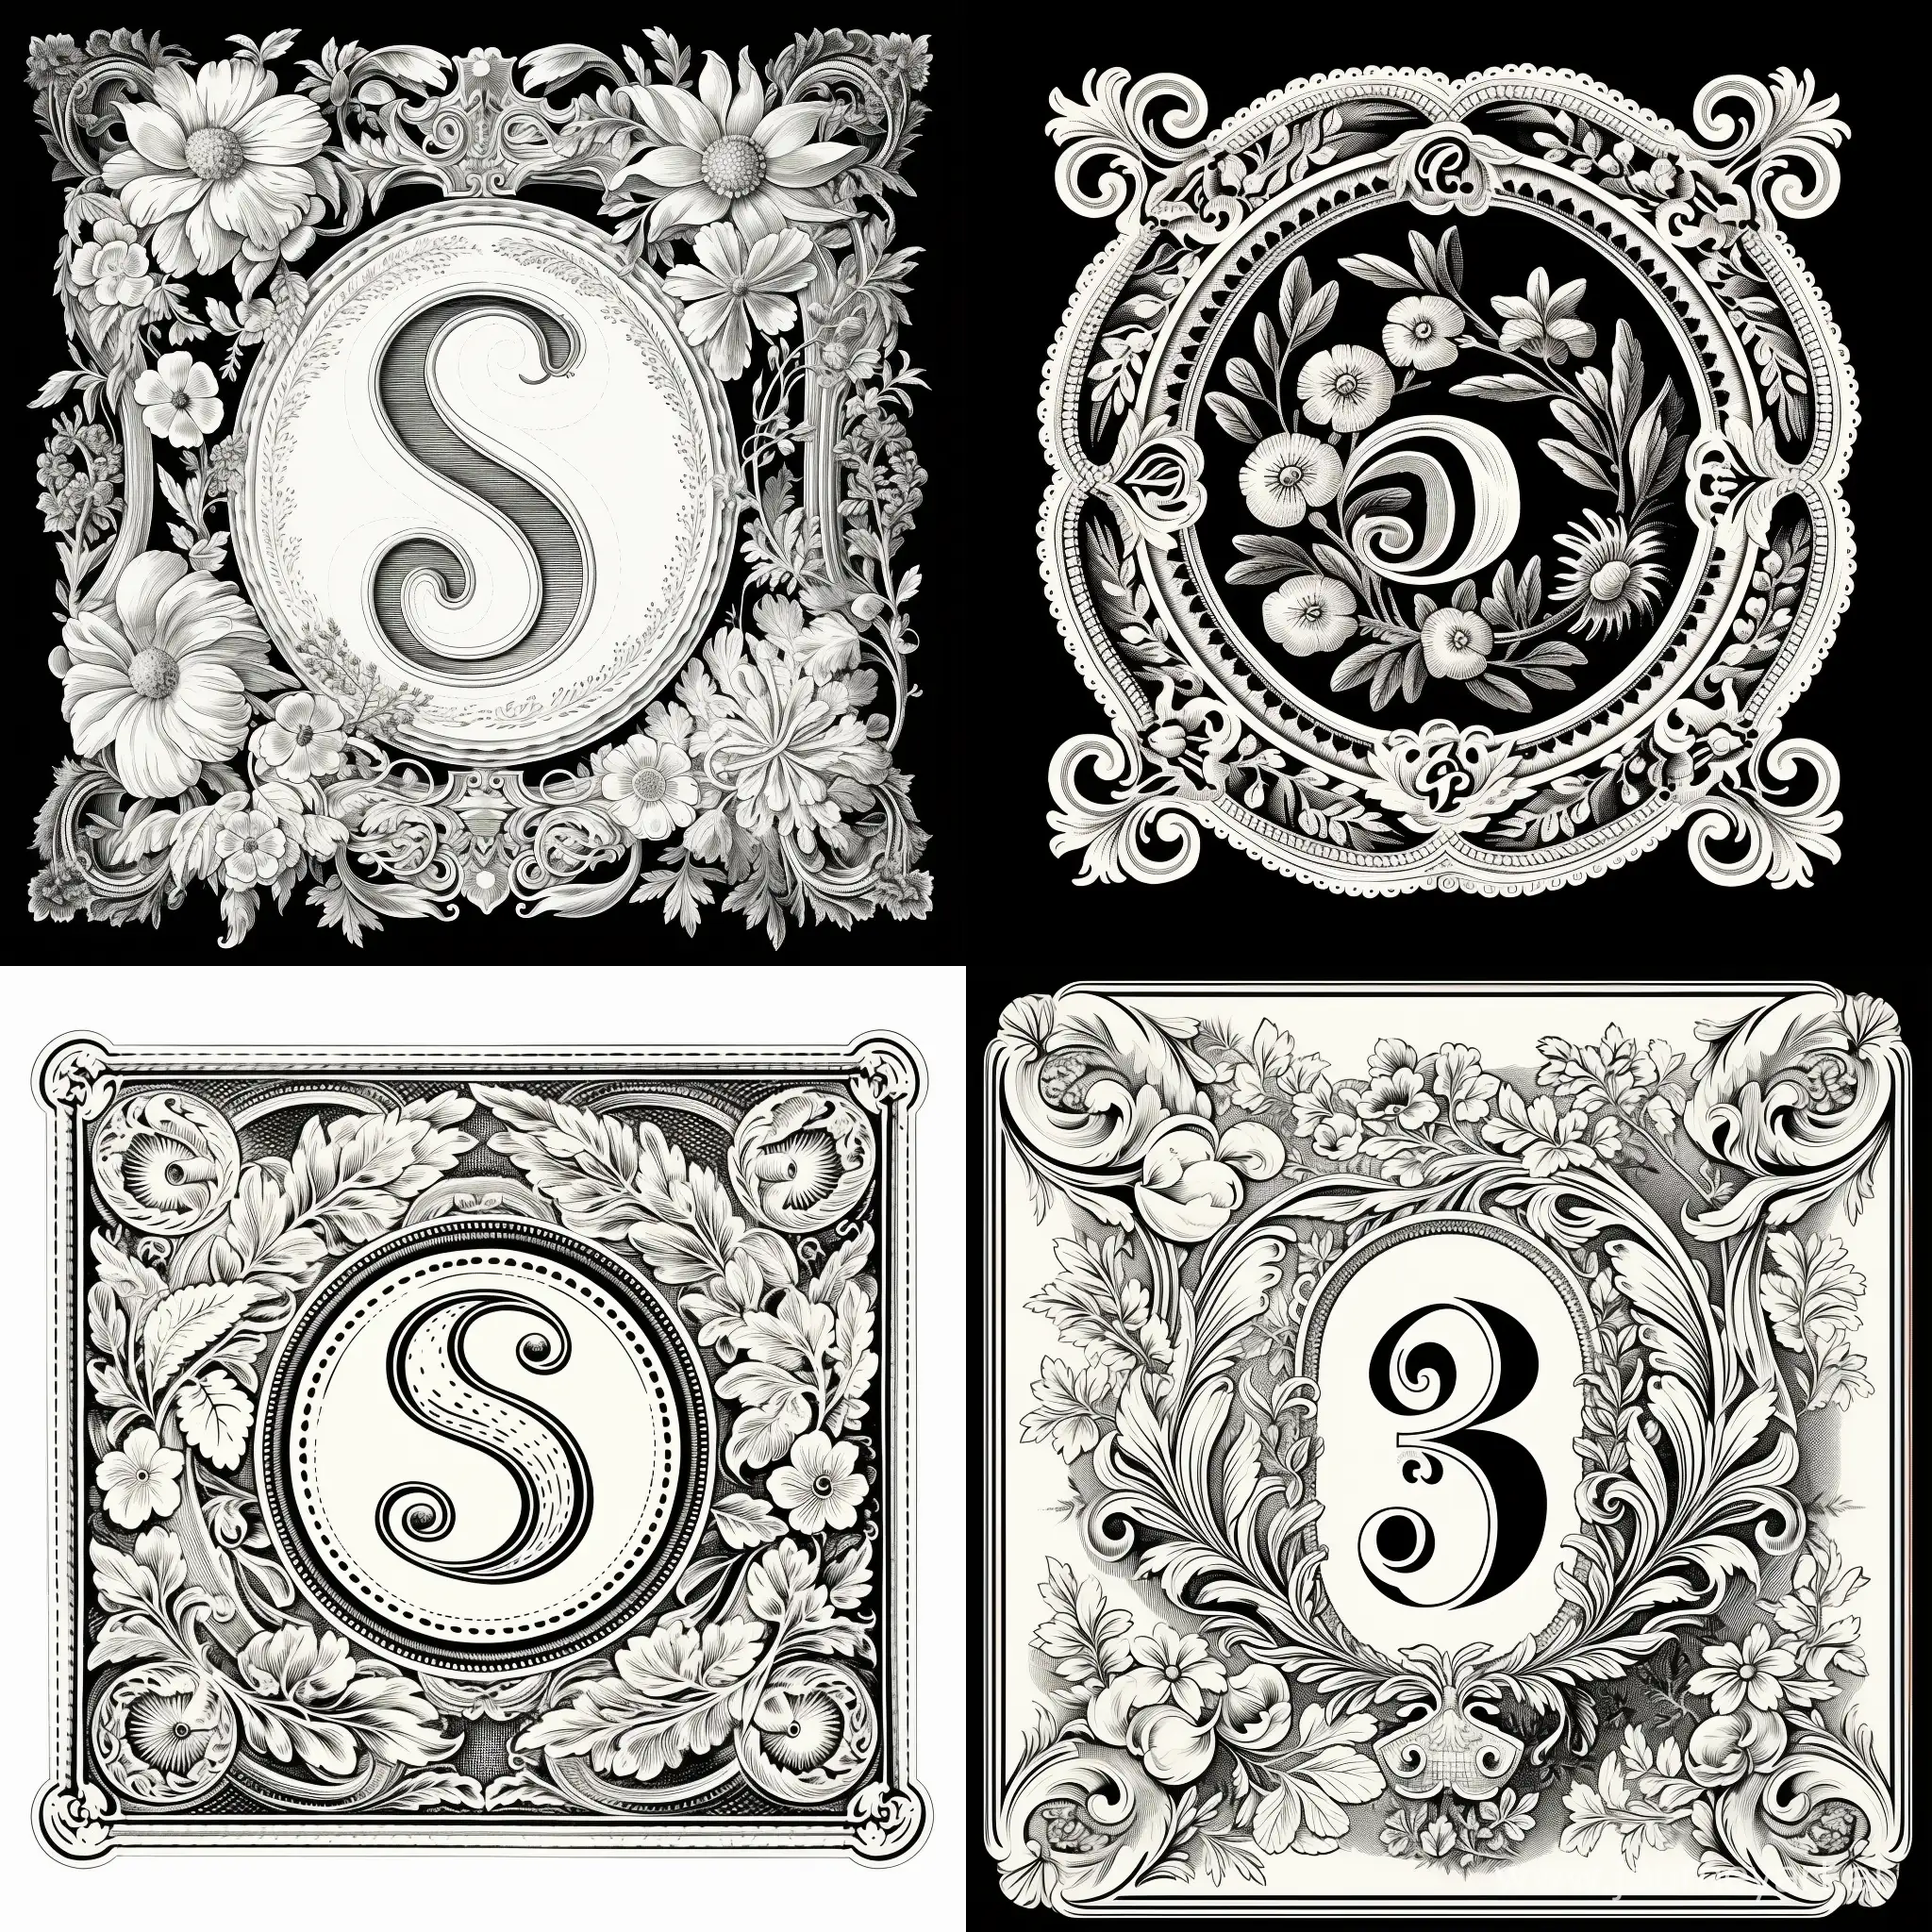 Create a graphic image featuring the number '62' in the style of vintage financial and commercial stamps from the late 19th century. The design should mimic the ornate and detailed engravings found in currency and fiscal documents of that era, with a monochromatic black and white palette. The number should be central, surrounded by intricate filigree borders and embellishments typical of the period. The typeface for the number '62' should reflect the old-fashioned, serif fonts used in the reference, and the entire composition should convey the aged and authentic quality of historical banknotes and stamps. It must be the Number 62!